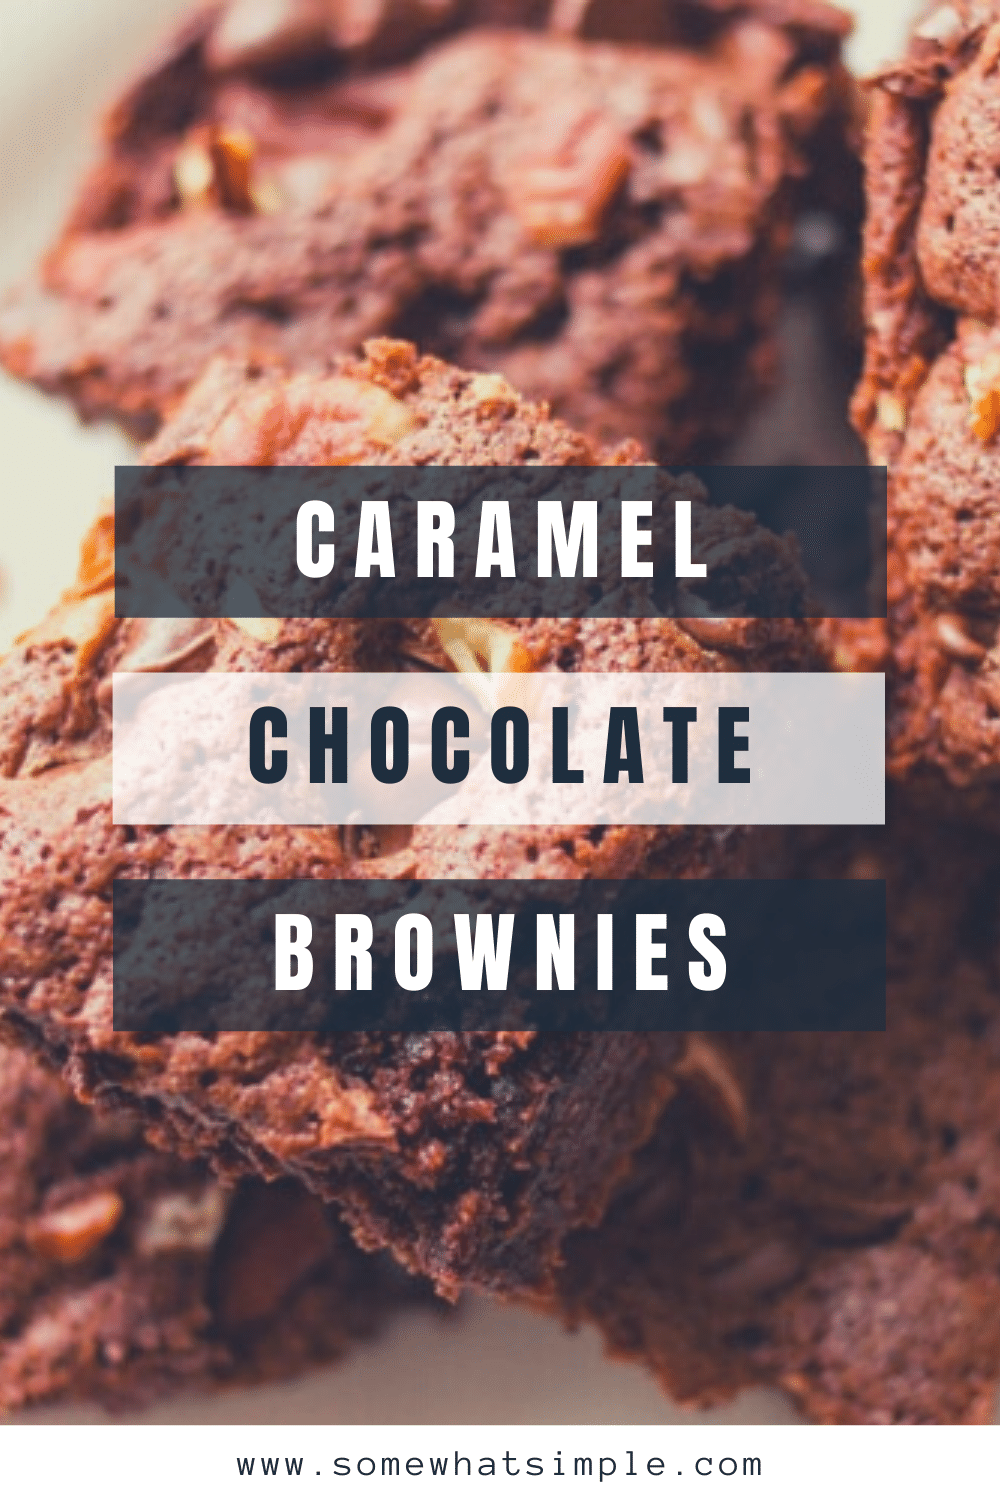 Chocolate and caramel brownies are a match made in heaven. Add pecans and you have unbeatable brownie recipe that are perfect for any occasion! These homemade brownies are made from scratch, so you know they're good. Plus, this recipe is so easy to make too! via @somewhatsimple